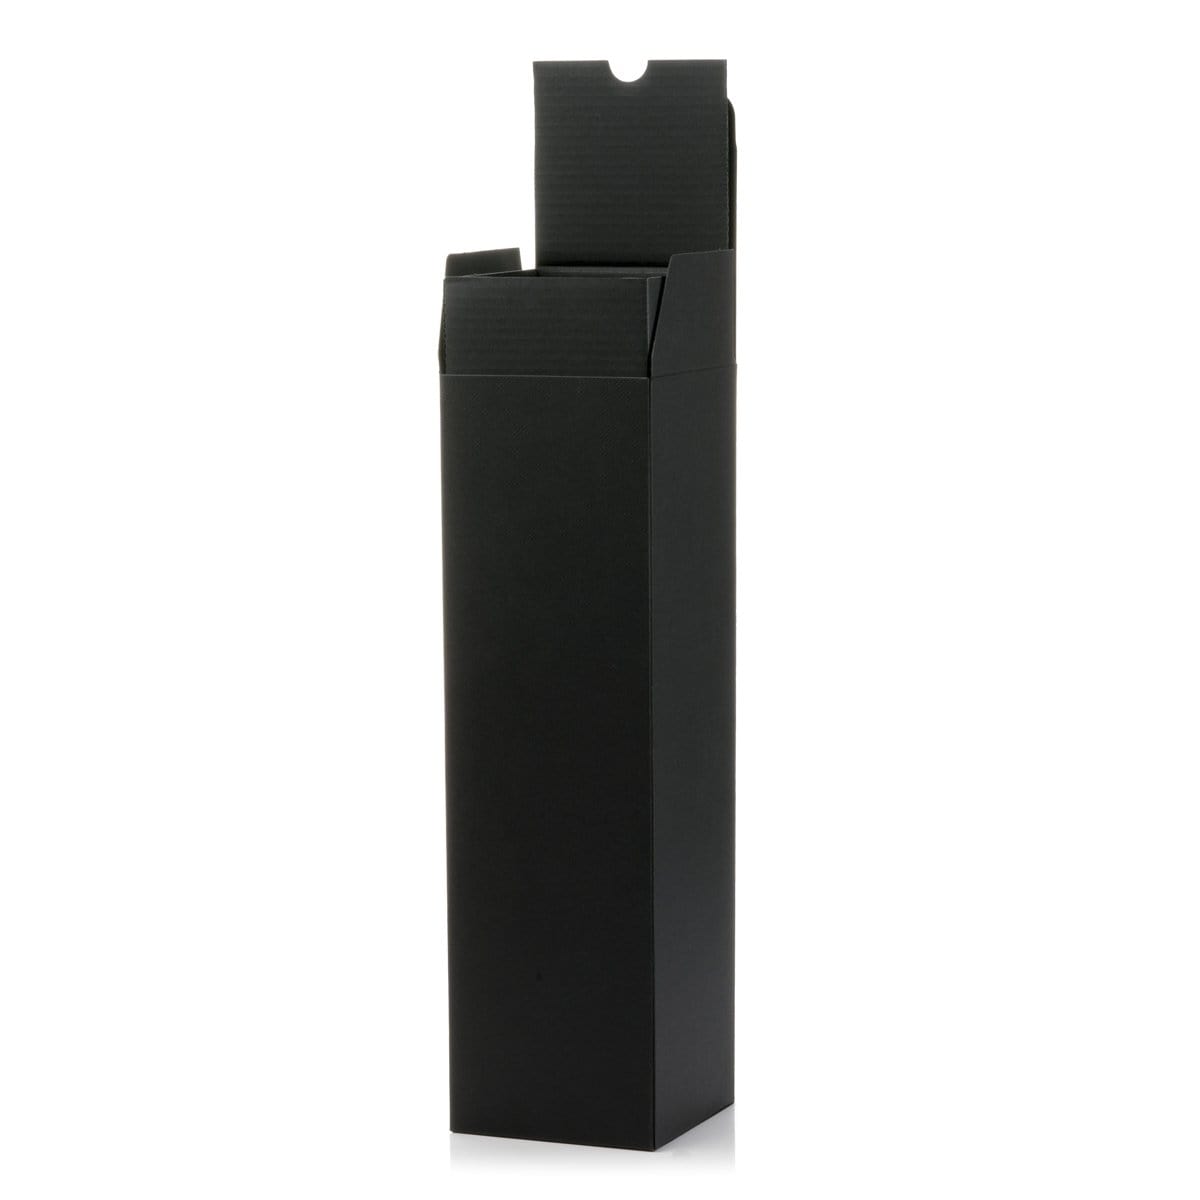 Candle Shack Diffuser Box Luxury Folding Box & Liner for 100ml Diffuser - Black